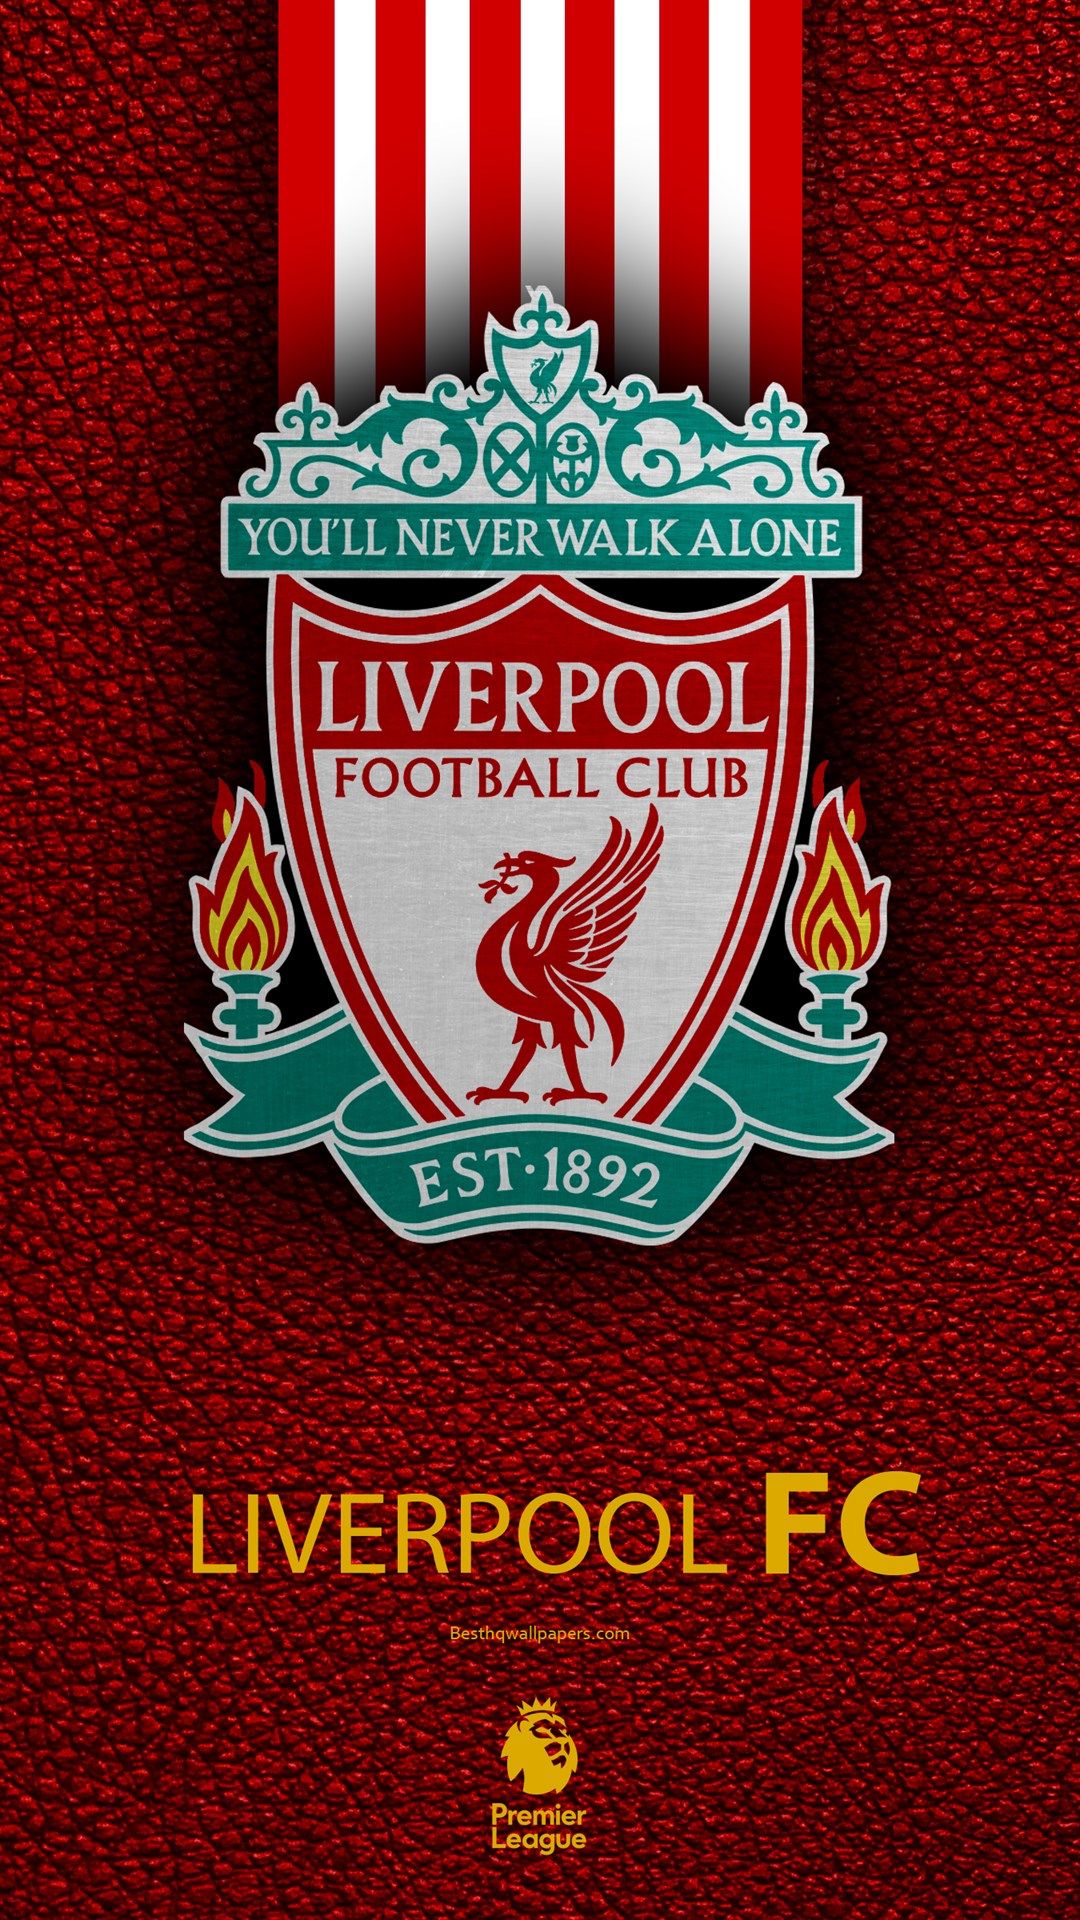 Liverpool Wallpapers 4k - Liverpool Legends in 4K Glory wallpapers logo Png